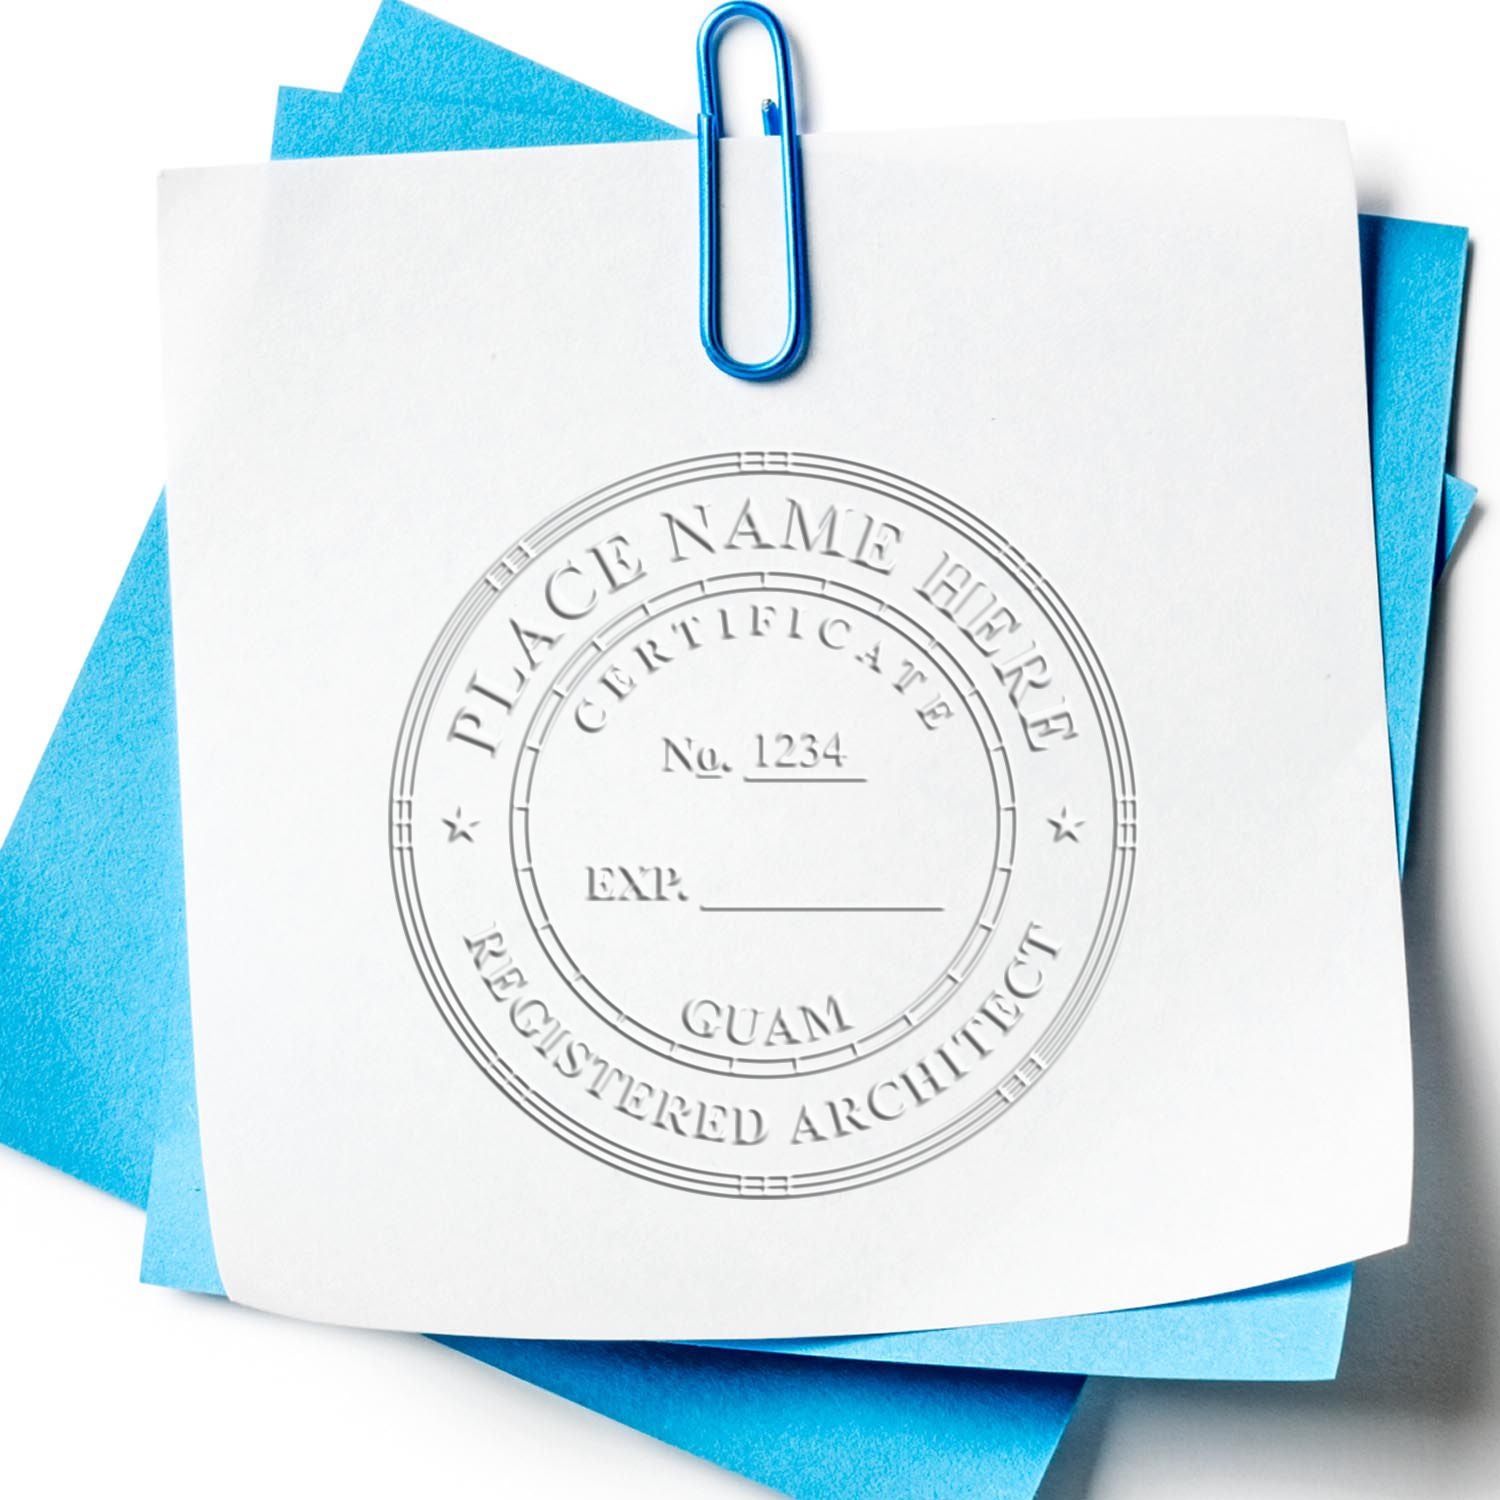 The main image for the Handheld Guam Architect Seal Embosser depicting a sample of the imprint and electronic files